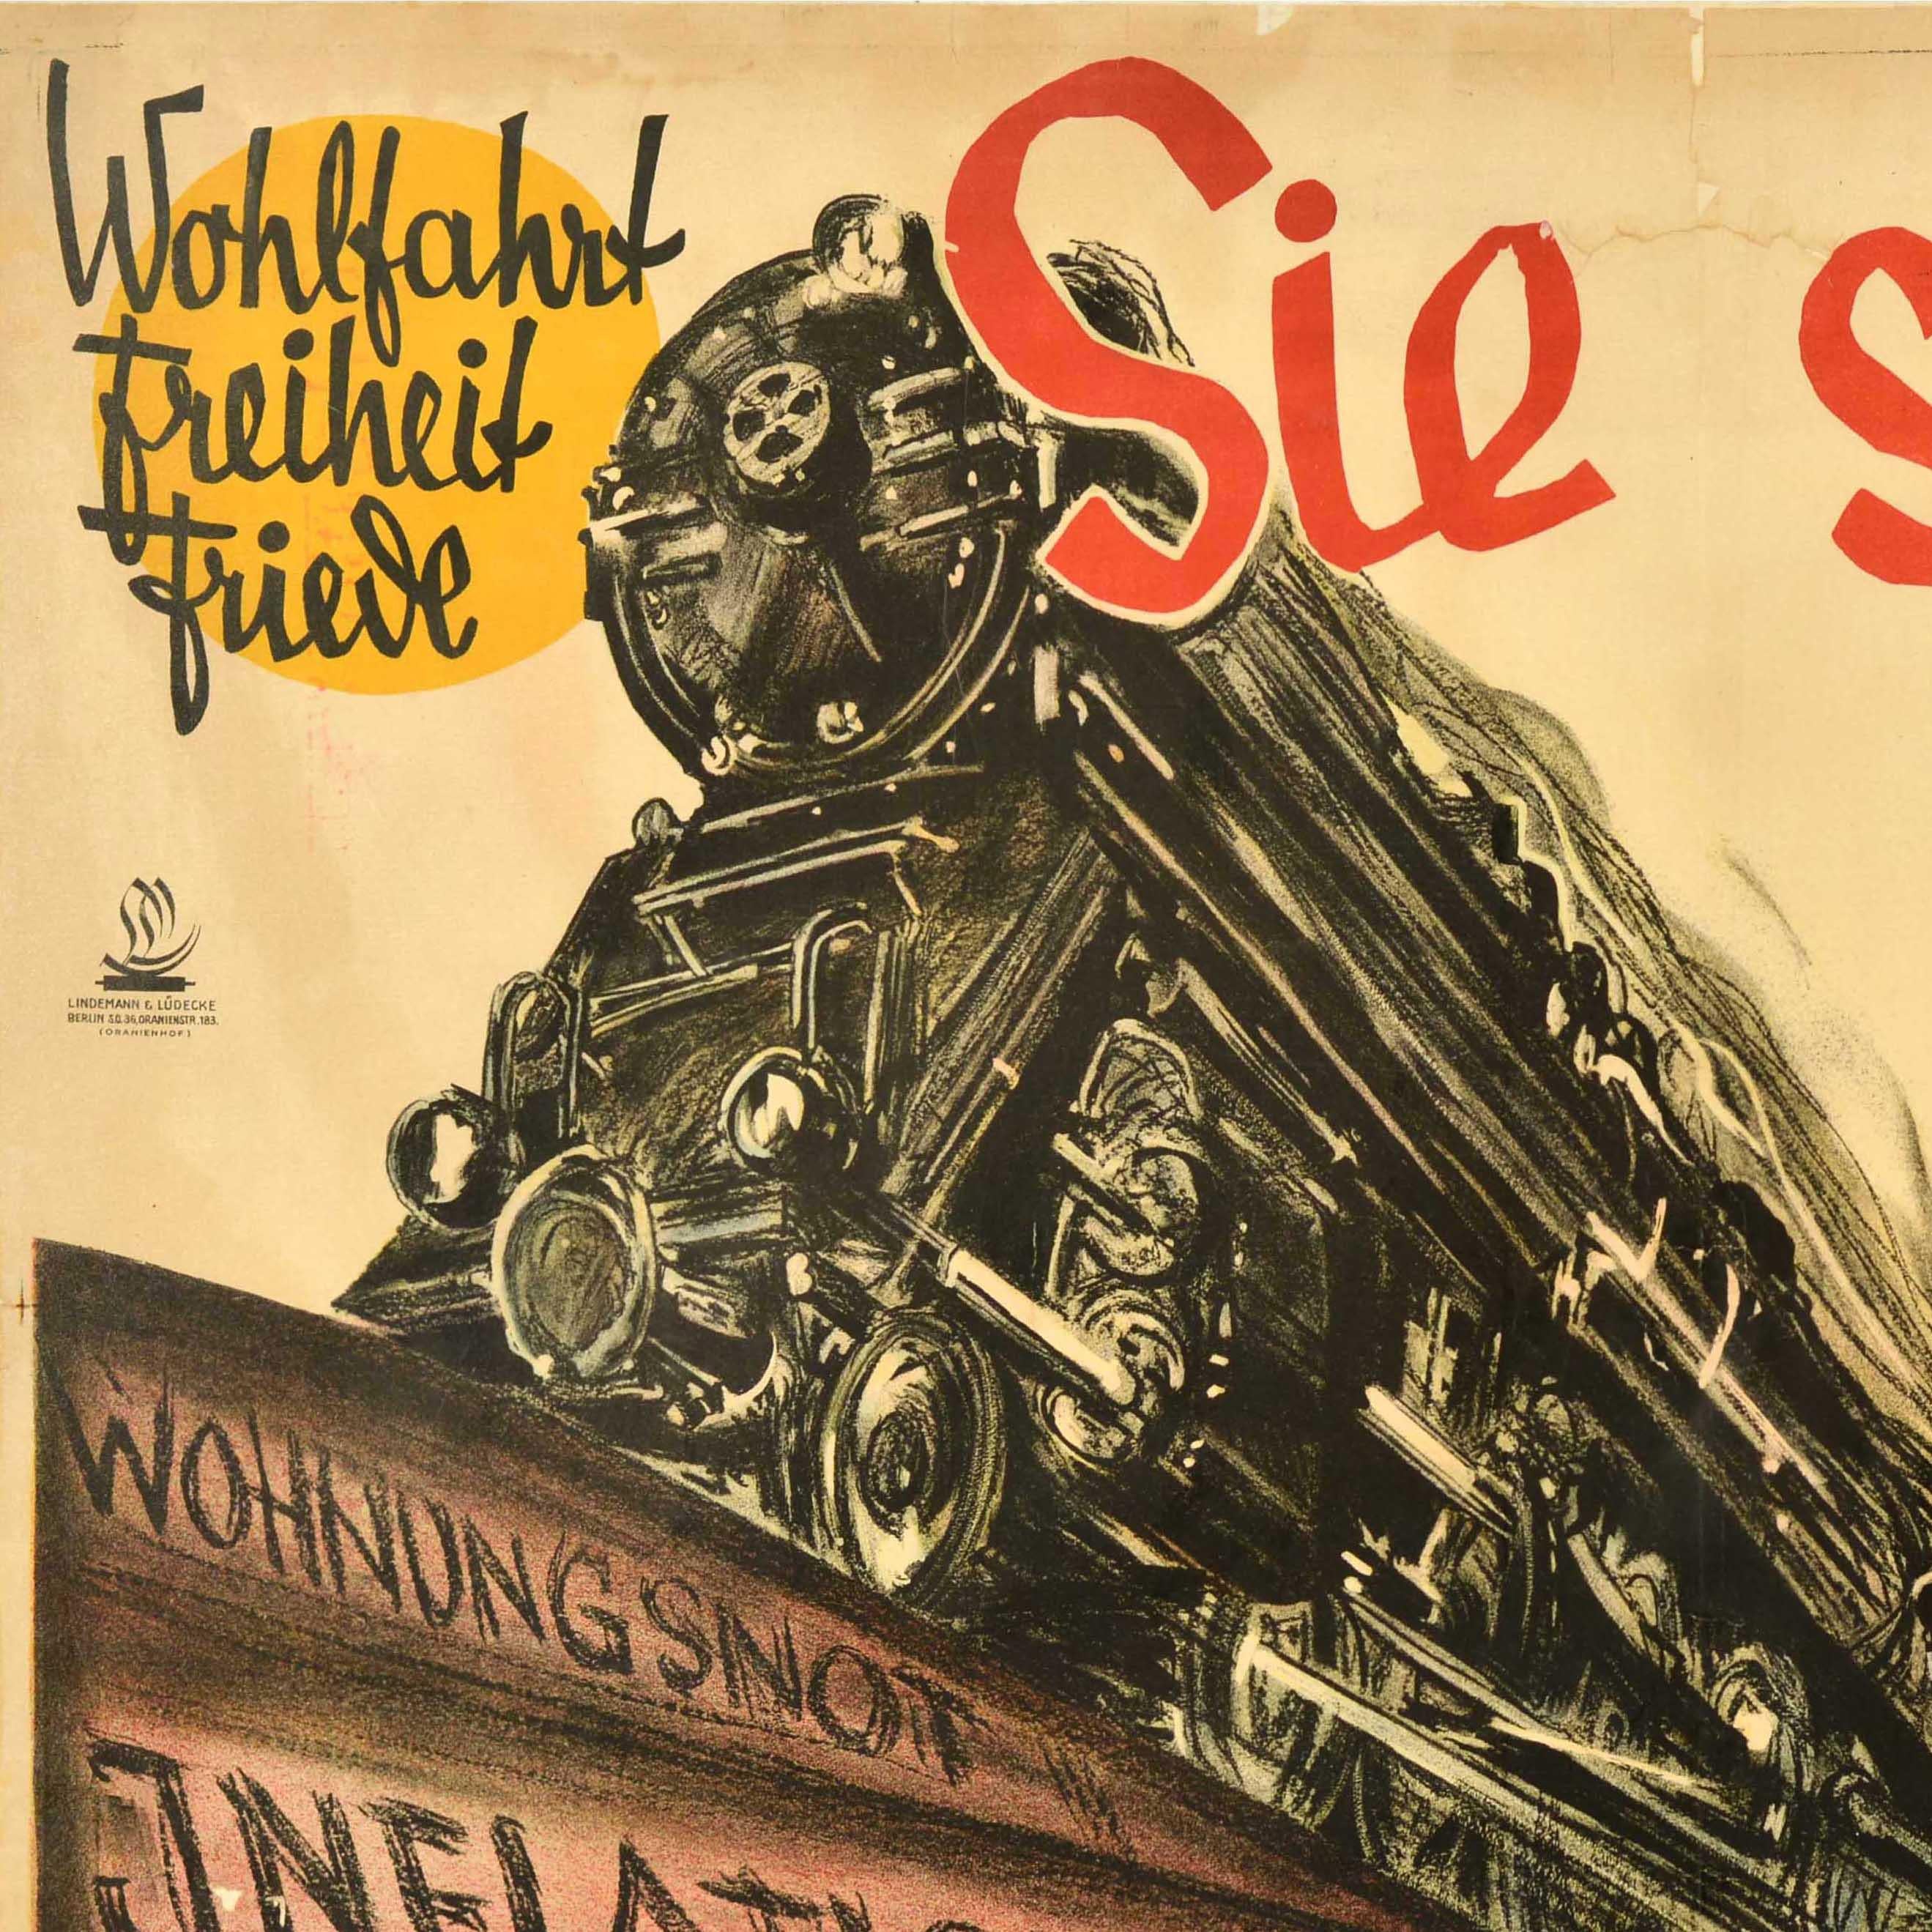 Original antique propaganda election poster for the German Democratic Party / Deutsche Demokratische Partei - featuring a dynamic design depicting a steam train travelling at speed on a track referencing Wohnungsnot Inflationzeit Spartakus Kreig /